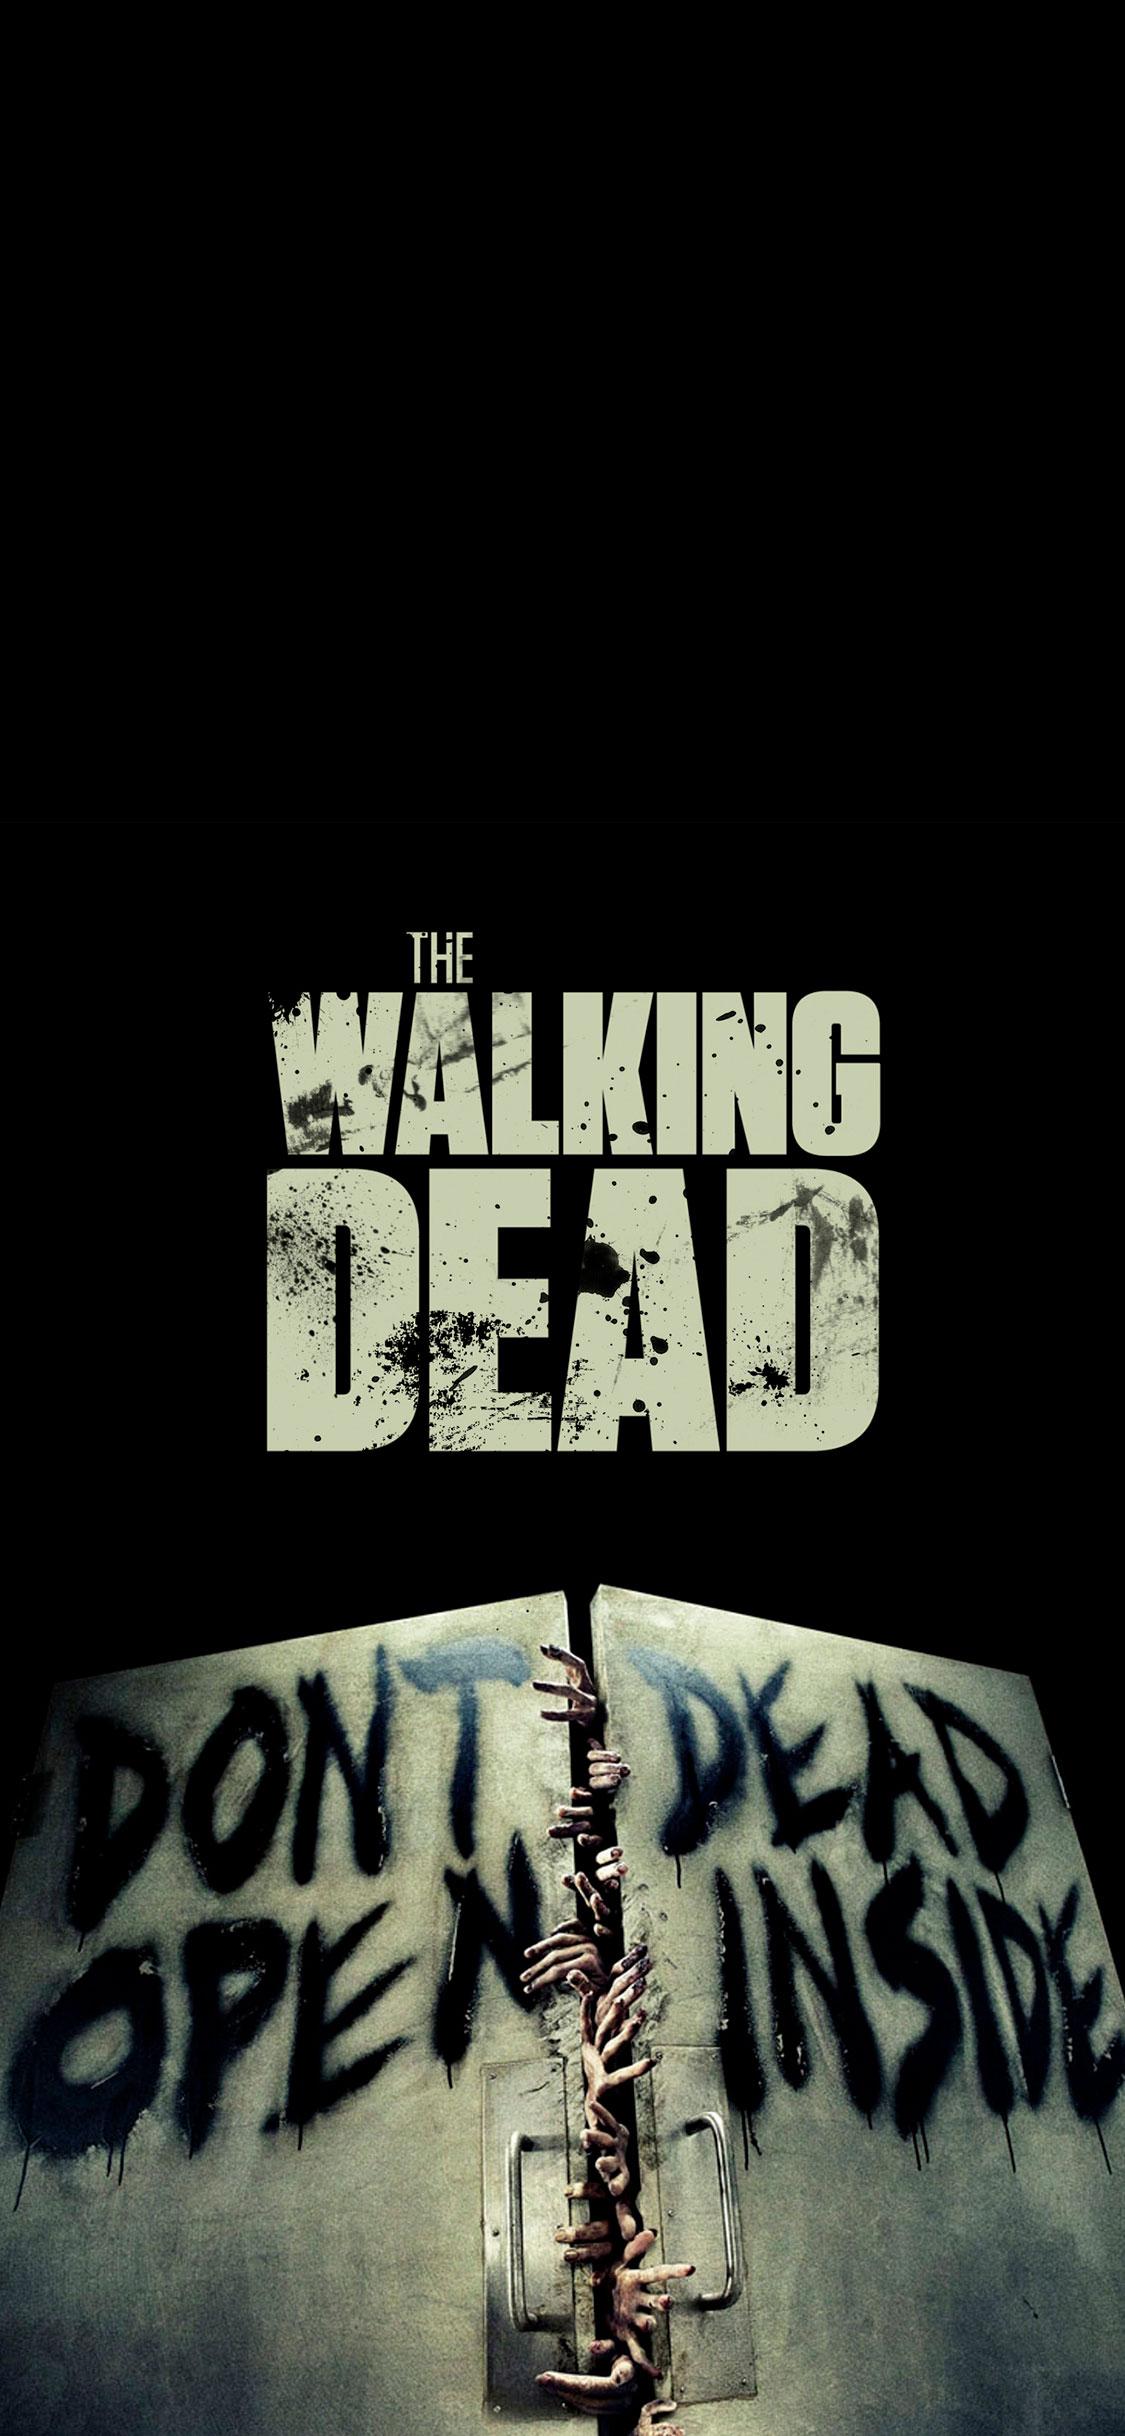 The Walking Dead Wallpaper for iPhone X, 6